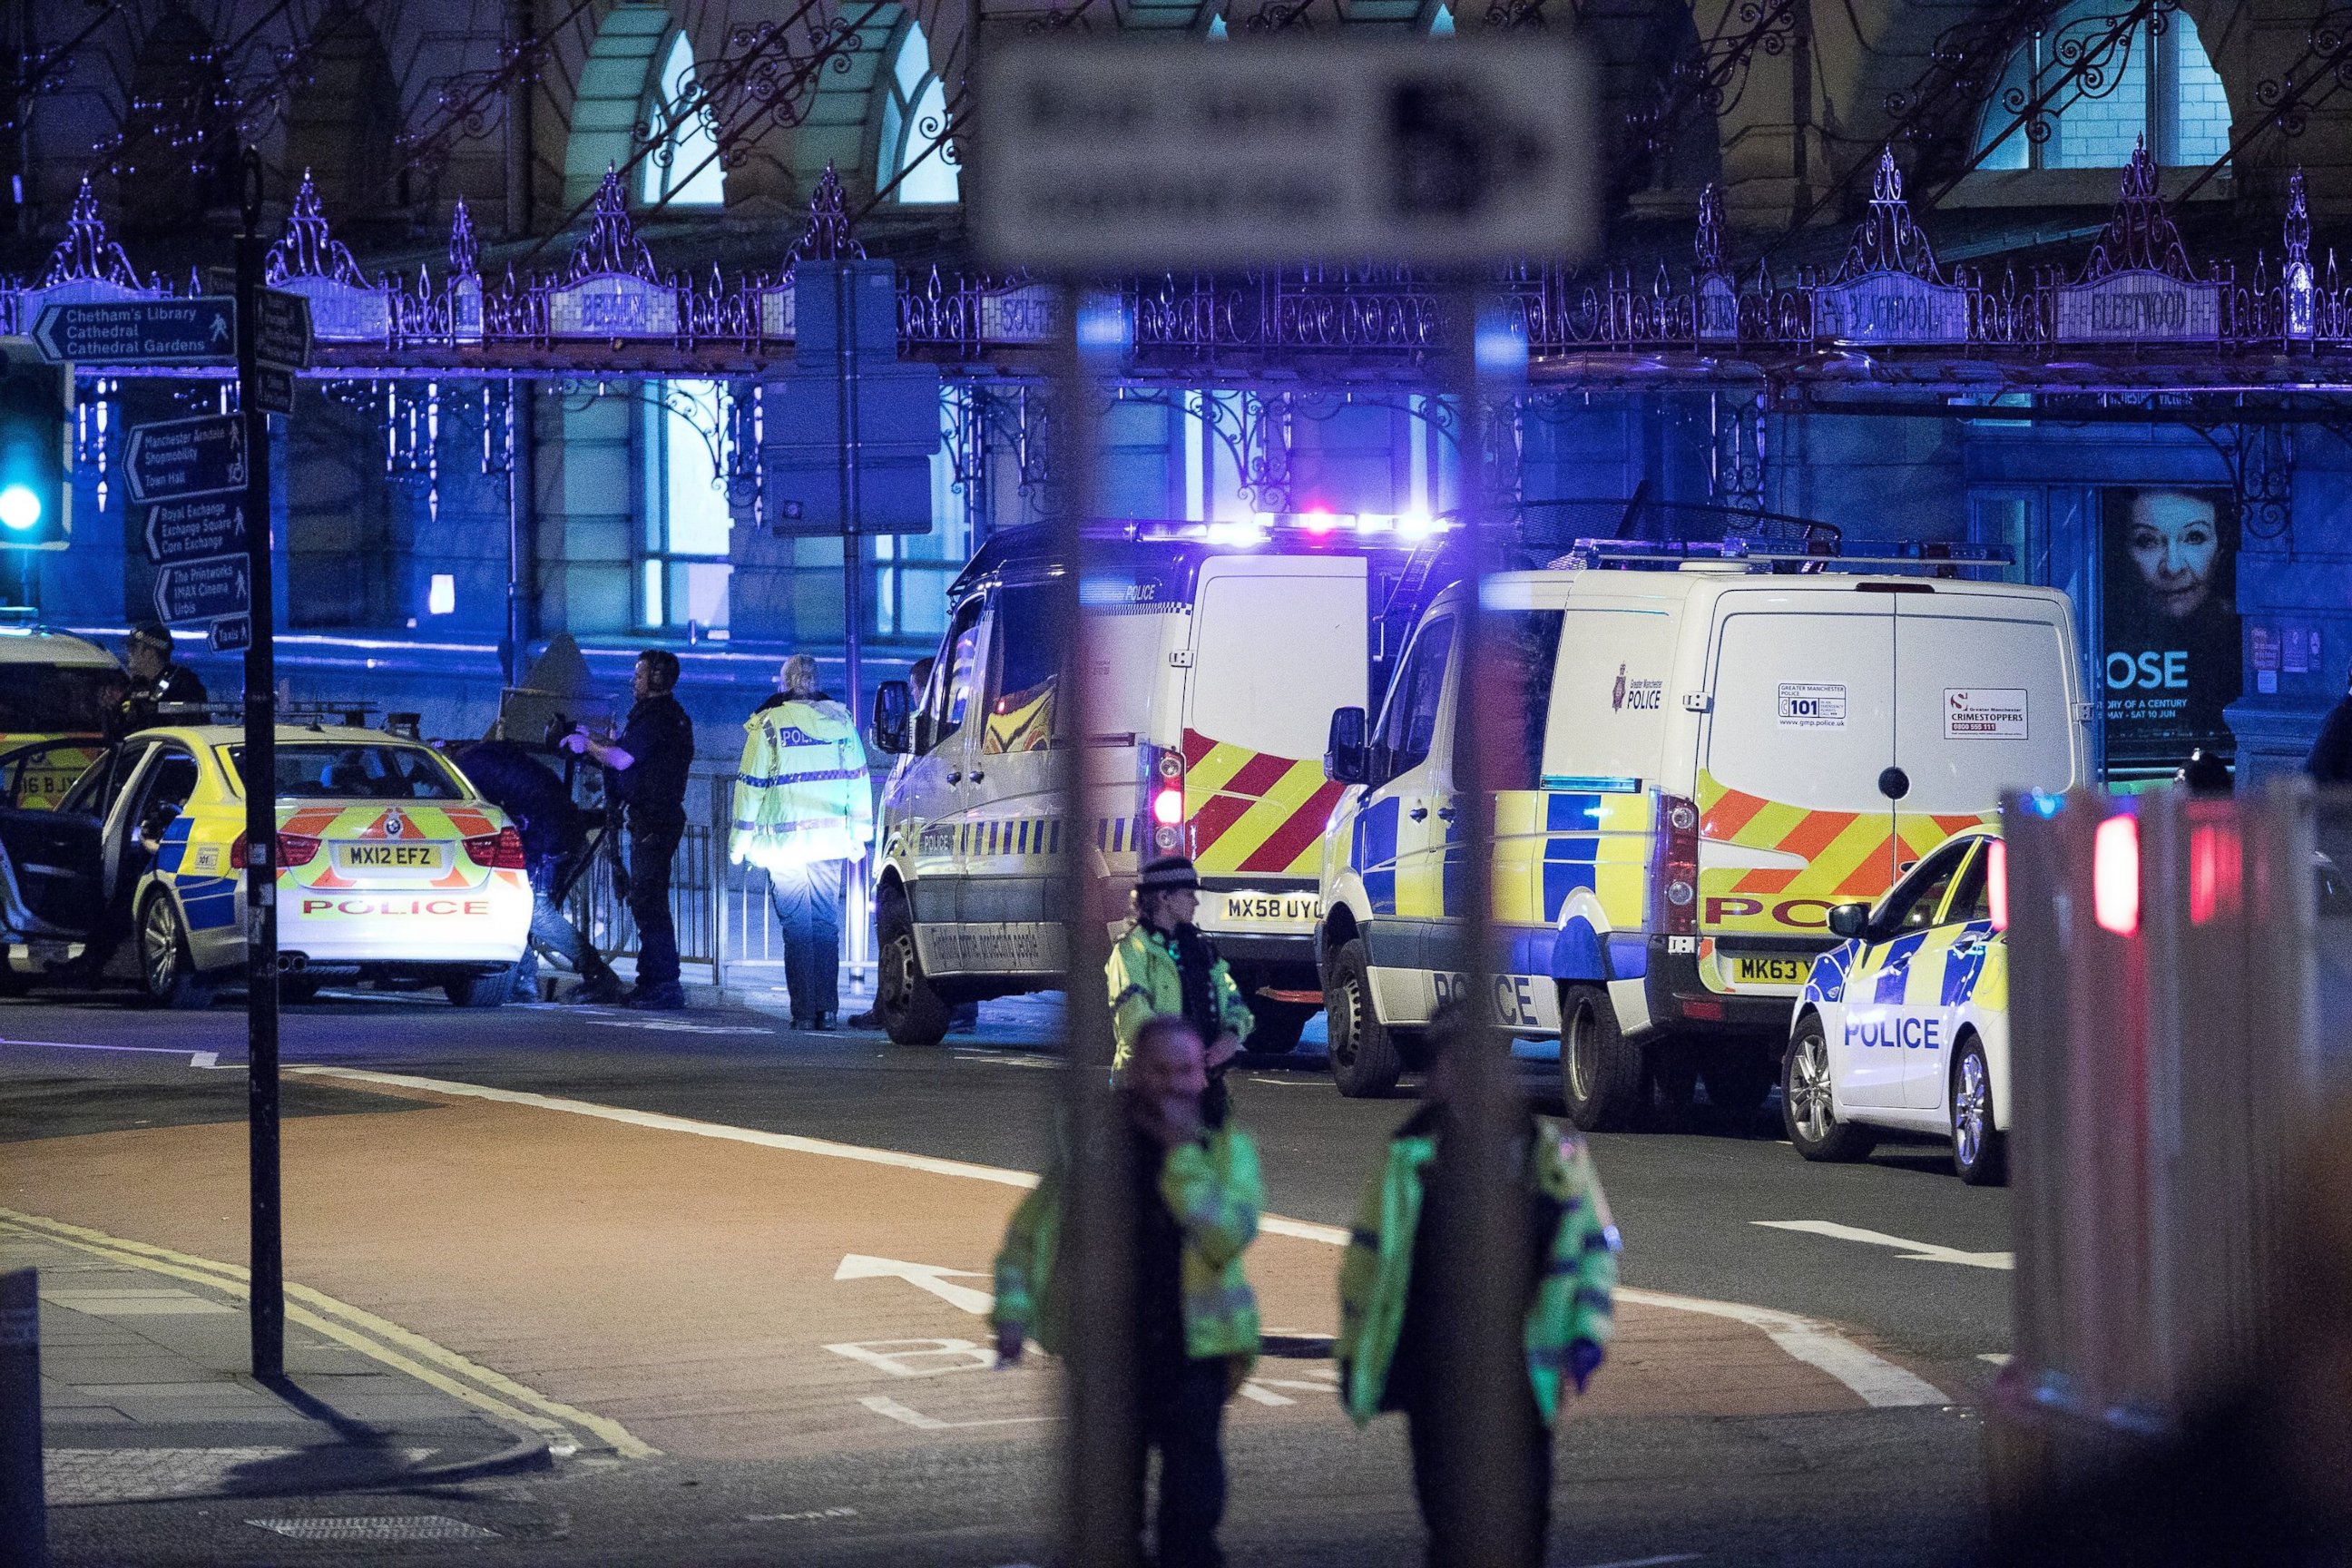 PHOTO: Police and other emergency services are seen near the Manchester Arena after reports of an explosion, May 22, 2017.